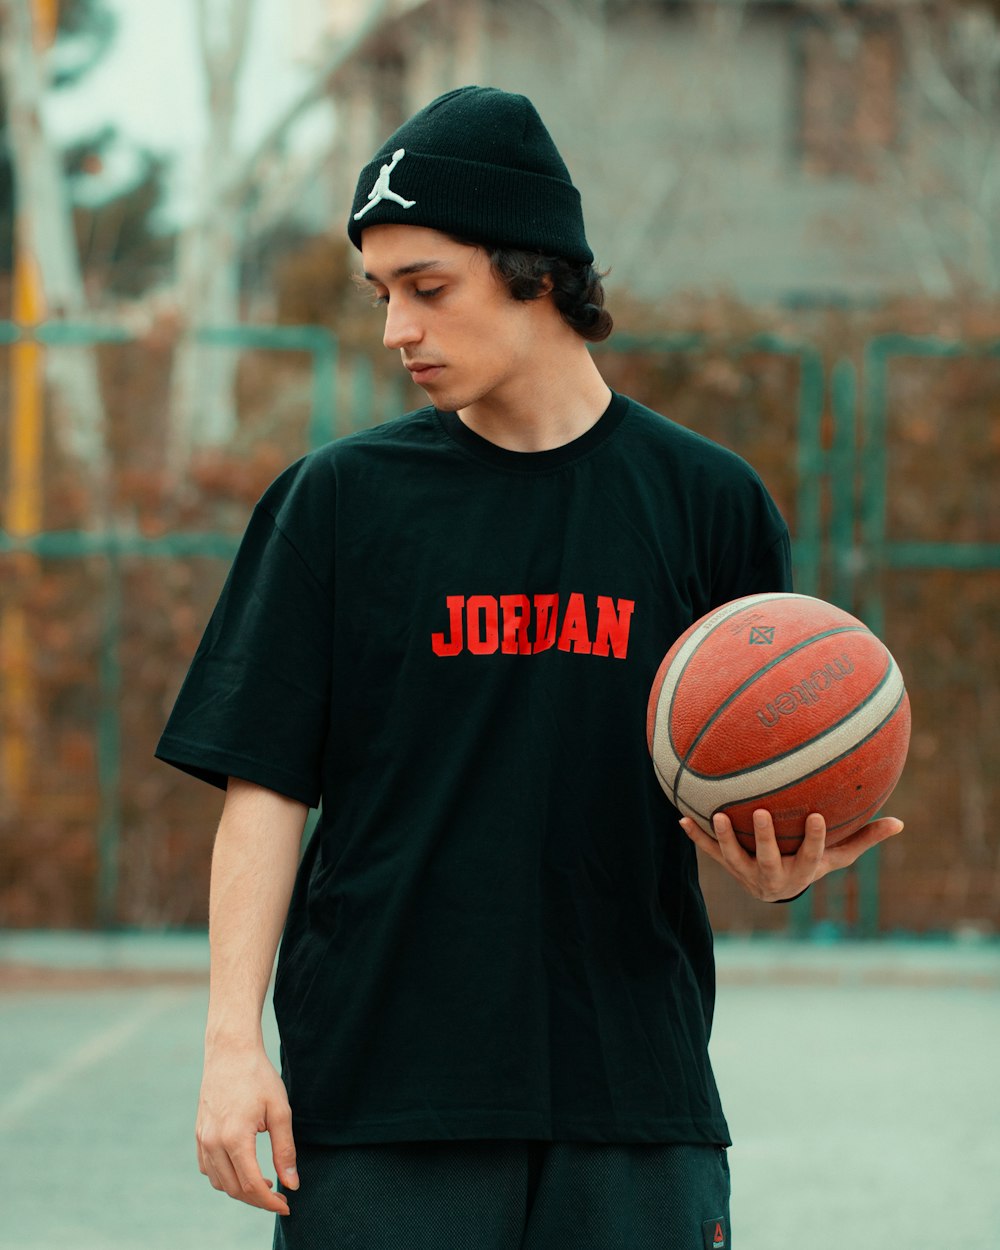 a young man holding a basketball on a basketball court